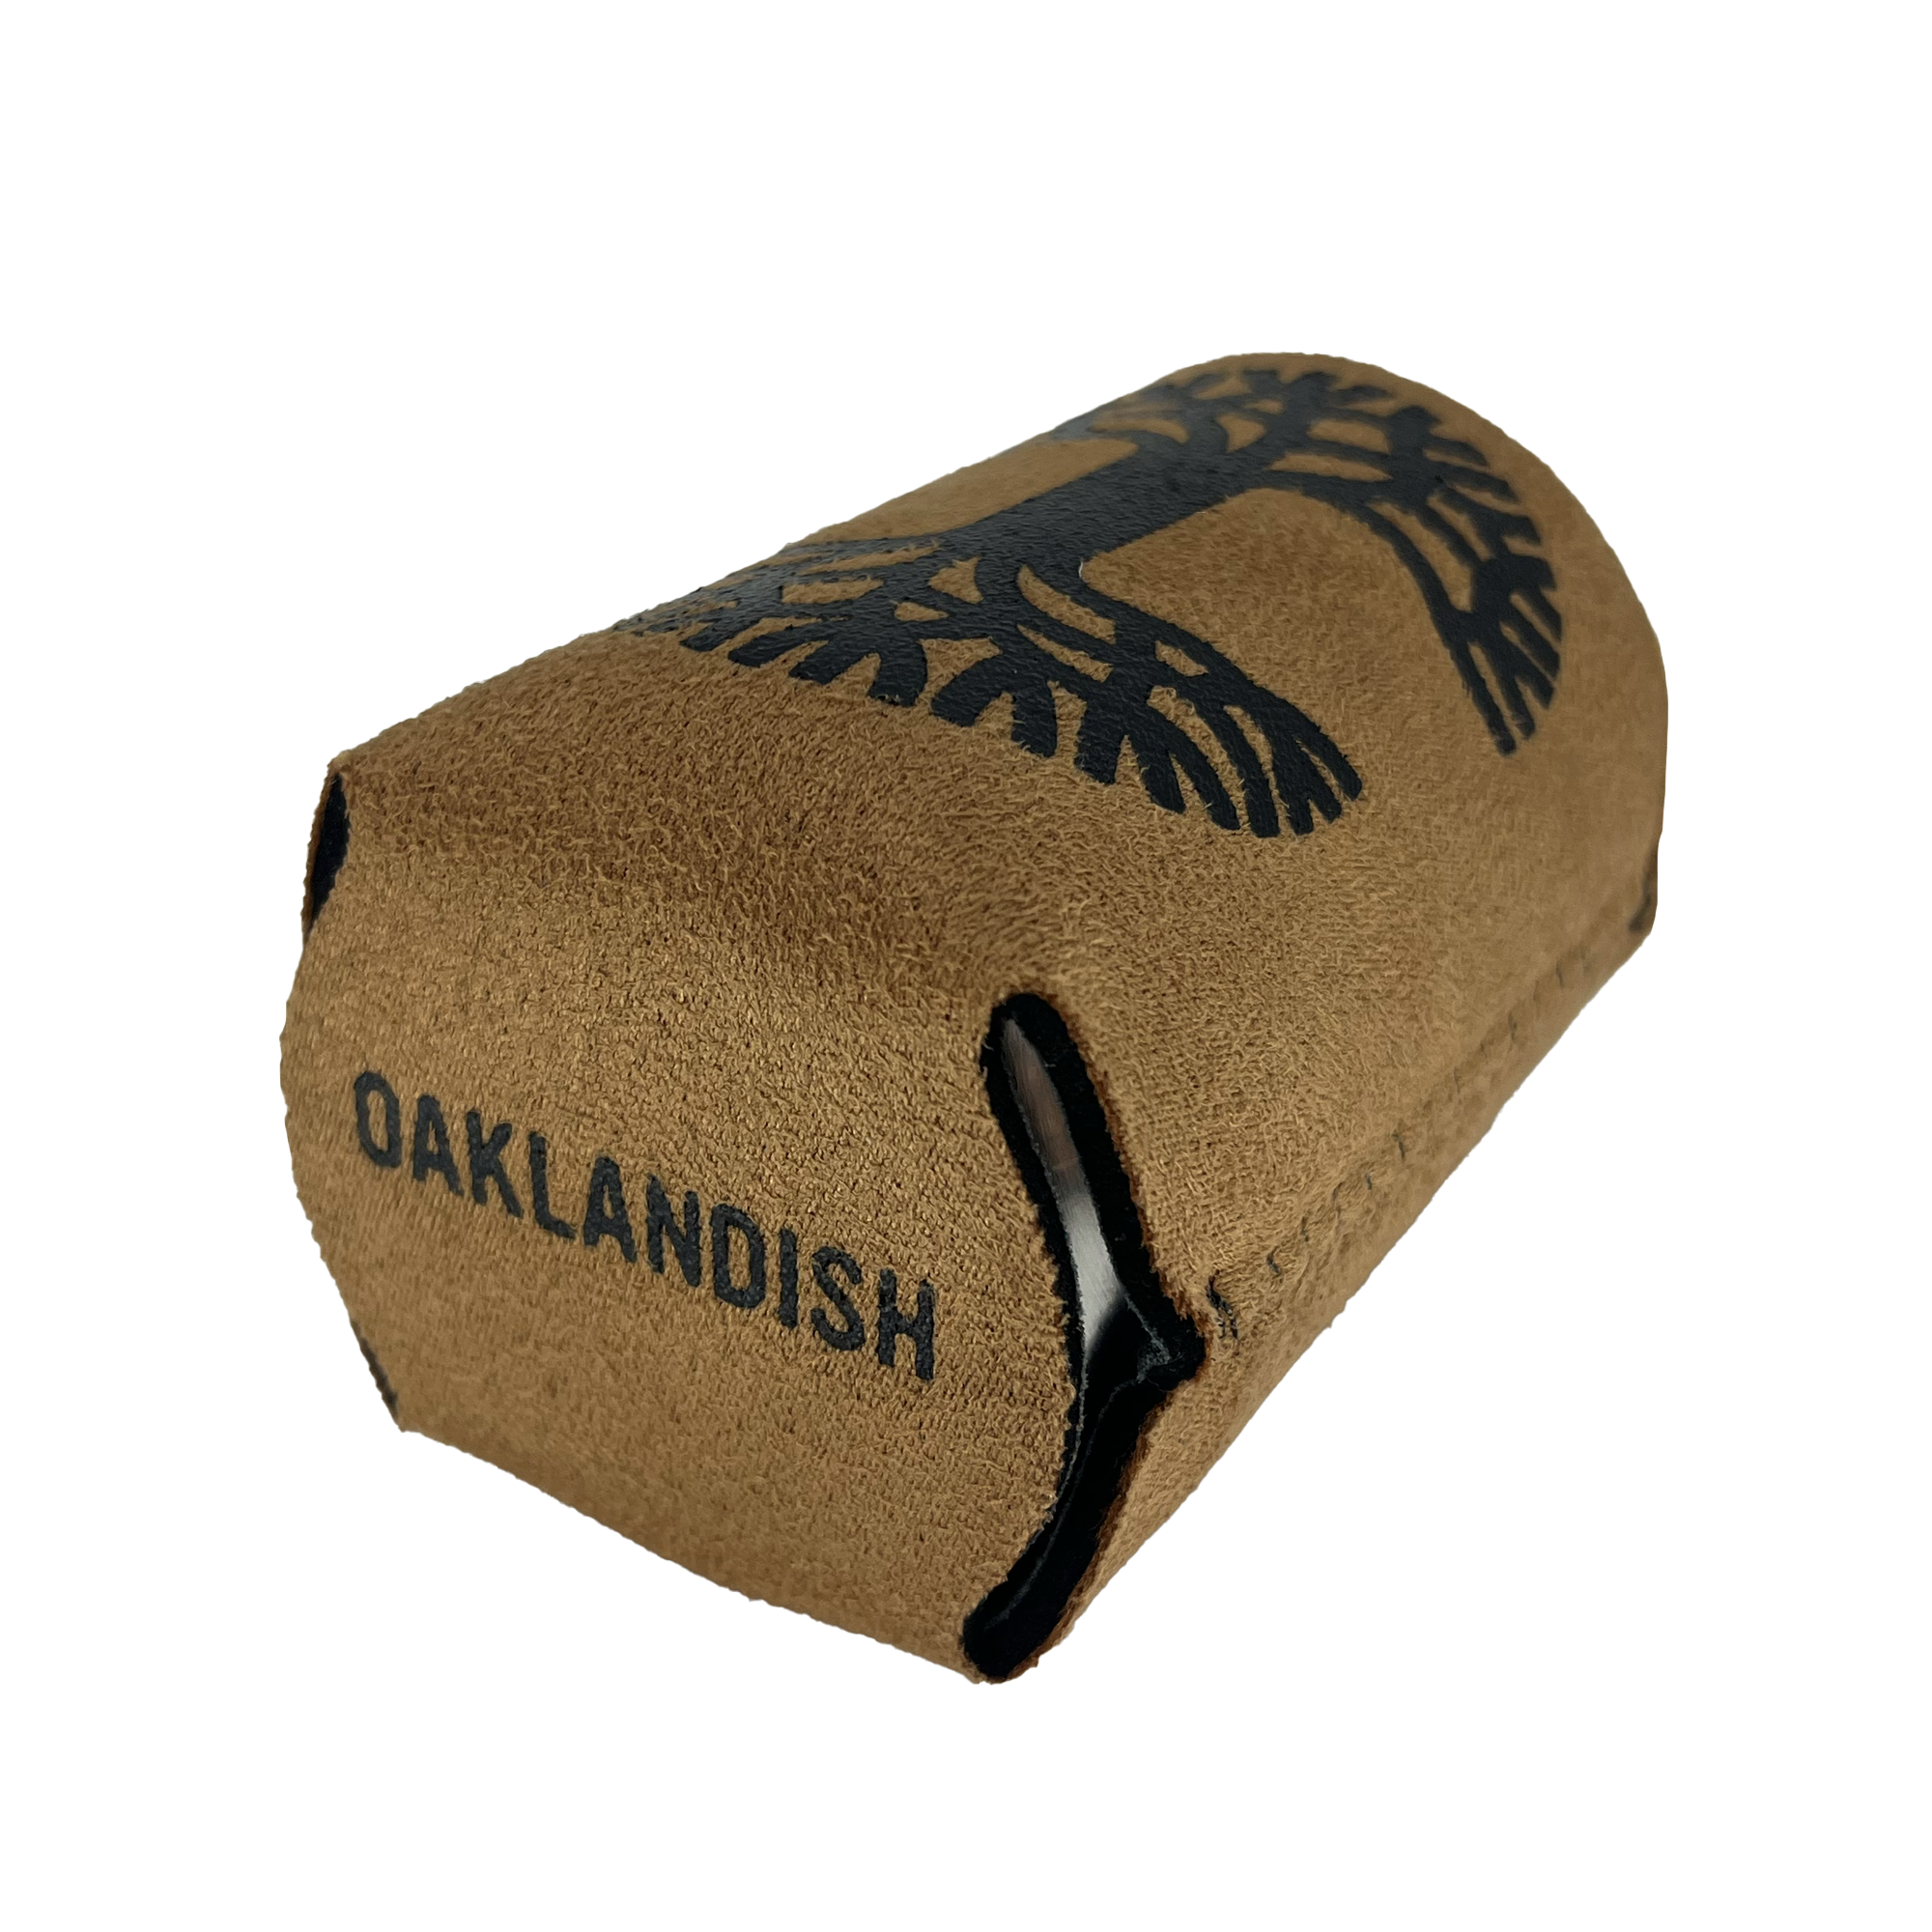 View of underside of suede feeling brown can cooler drink sleeve with OAKLANDISH wordmark on the bottom.